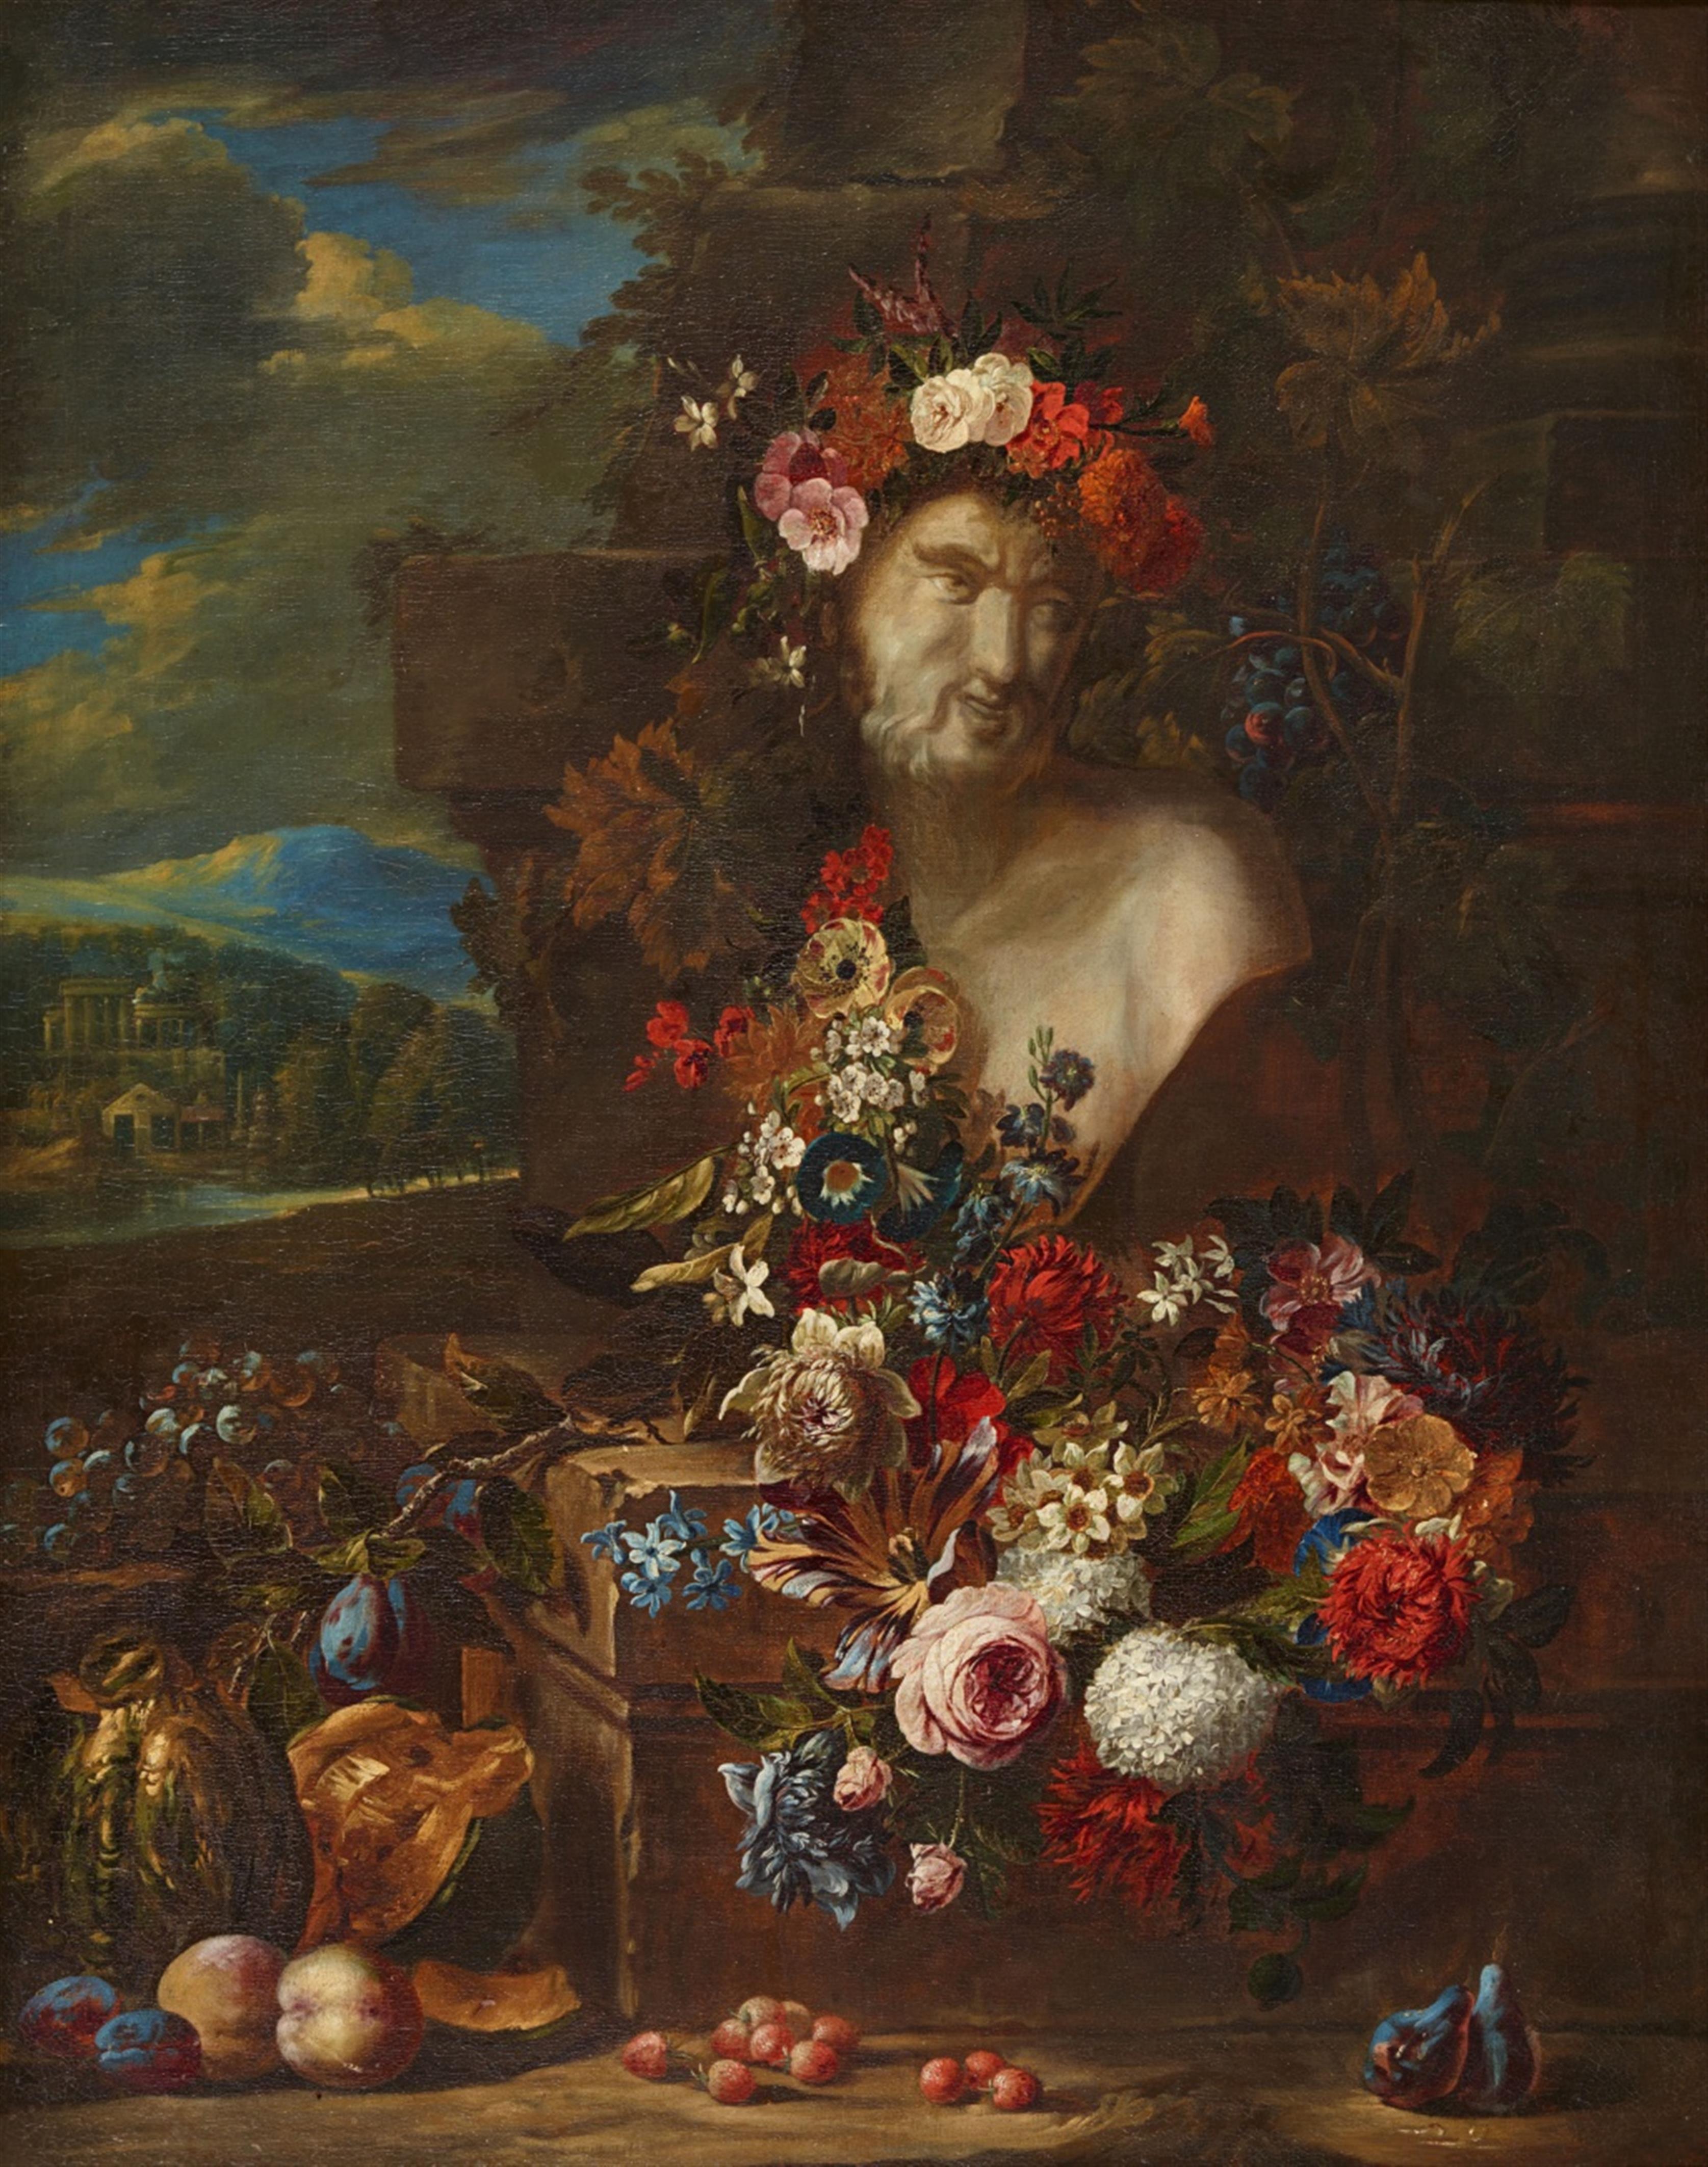 Jacob van der Borcht (Borght), attributed to - Still Life with a Bust of Pan, Flowers, and Fruit in a Landscape - image-1